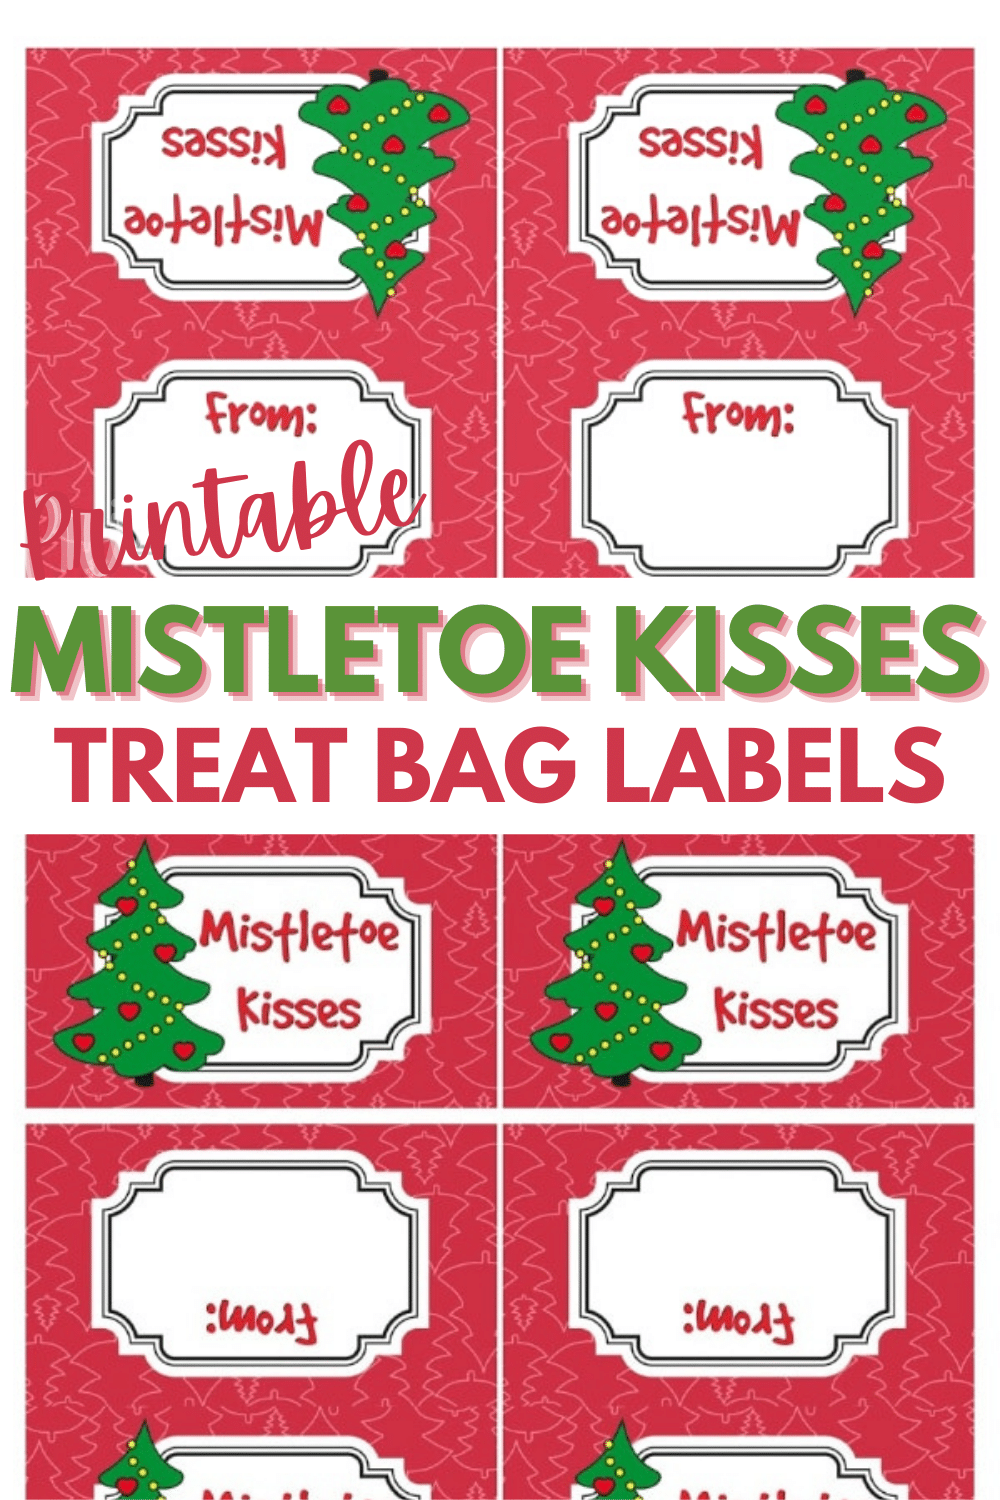 Mistletoe Kisses Treat Bags comes with printable treat bag toppers and are such a quick gift to make. Fill the treat bags with Hershey kisses and give away. #treatbags #christmas #printables via @wondermomwannab